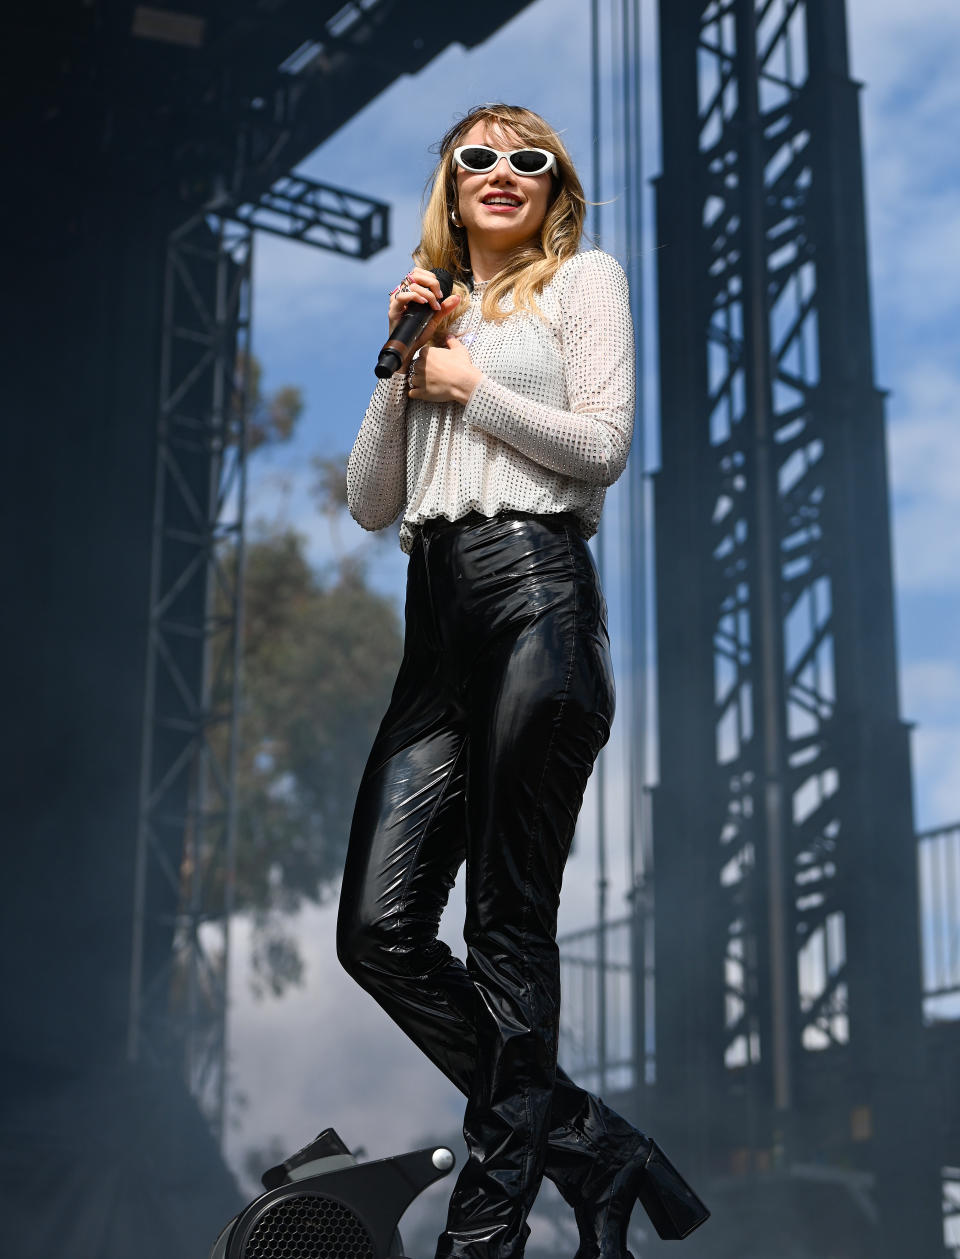 Suki Waterhouse performs onstage at the 2023 Ohana Festival held at Doheny State Beach on October 1, 2023 in Dana Point, California. (Photo by Gilbert Flores/Billboard via Getty Images)